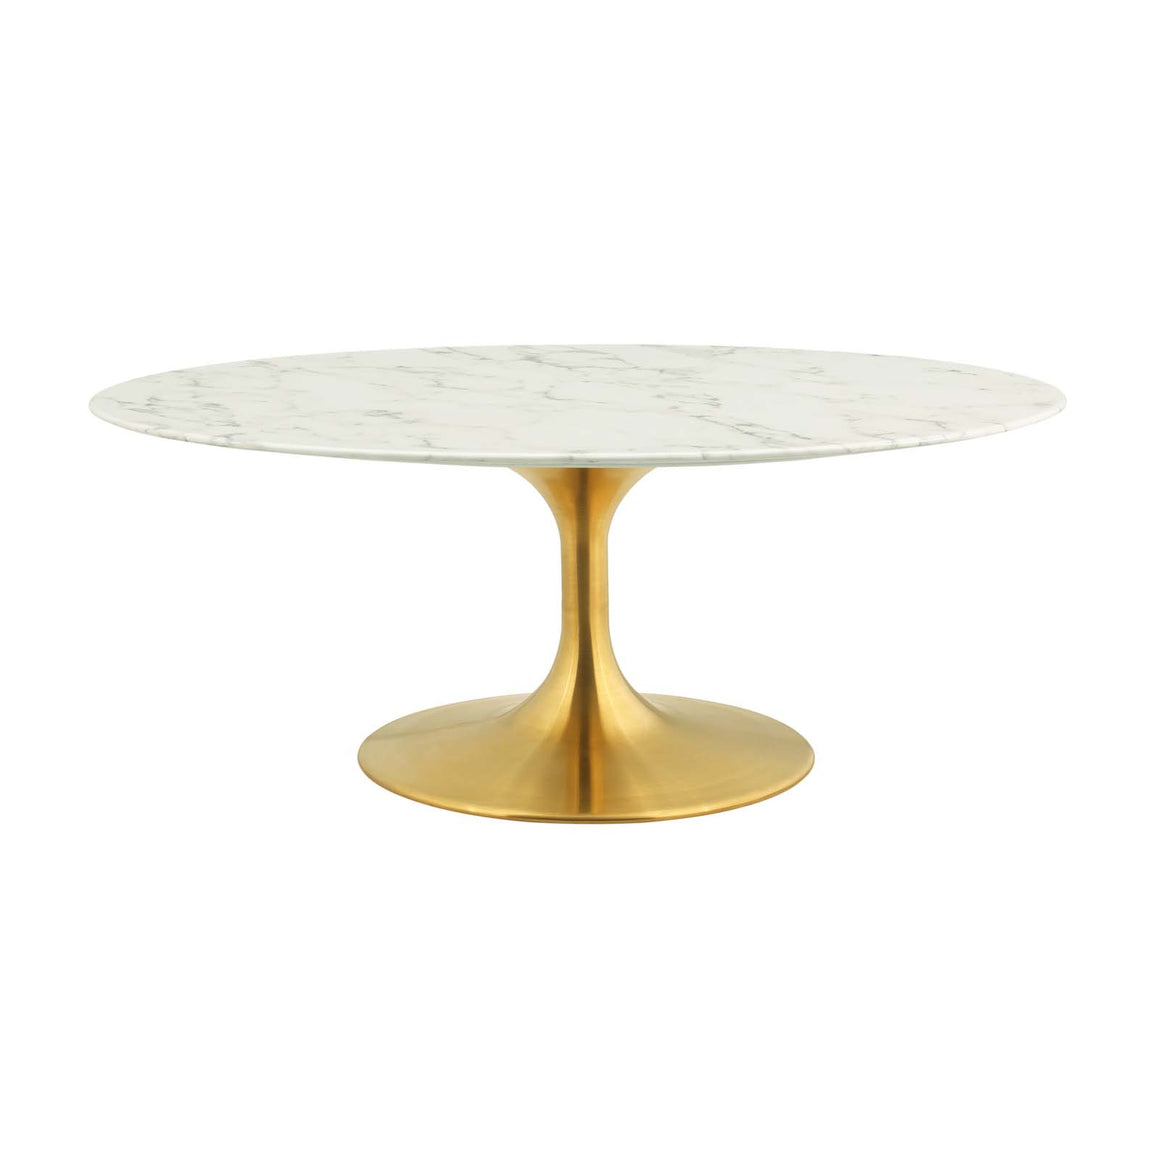 Lippa 42" Oval-Shaped Artificial Coffee Table in Gold White